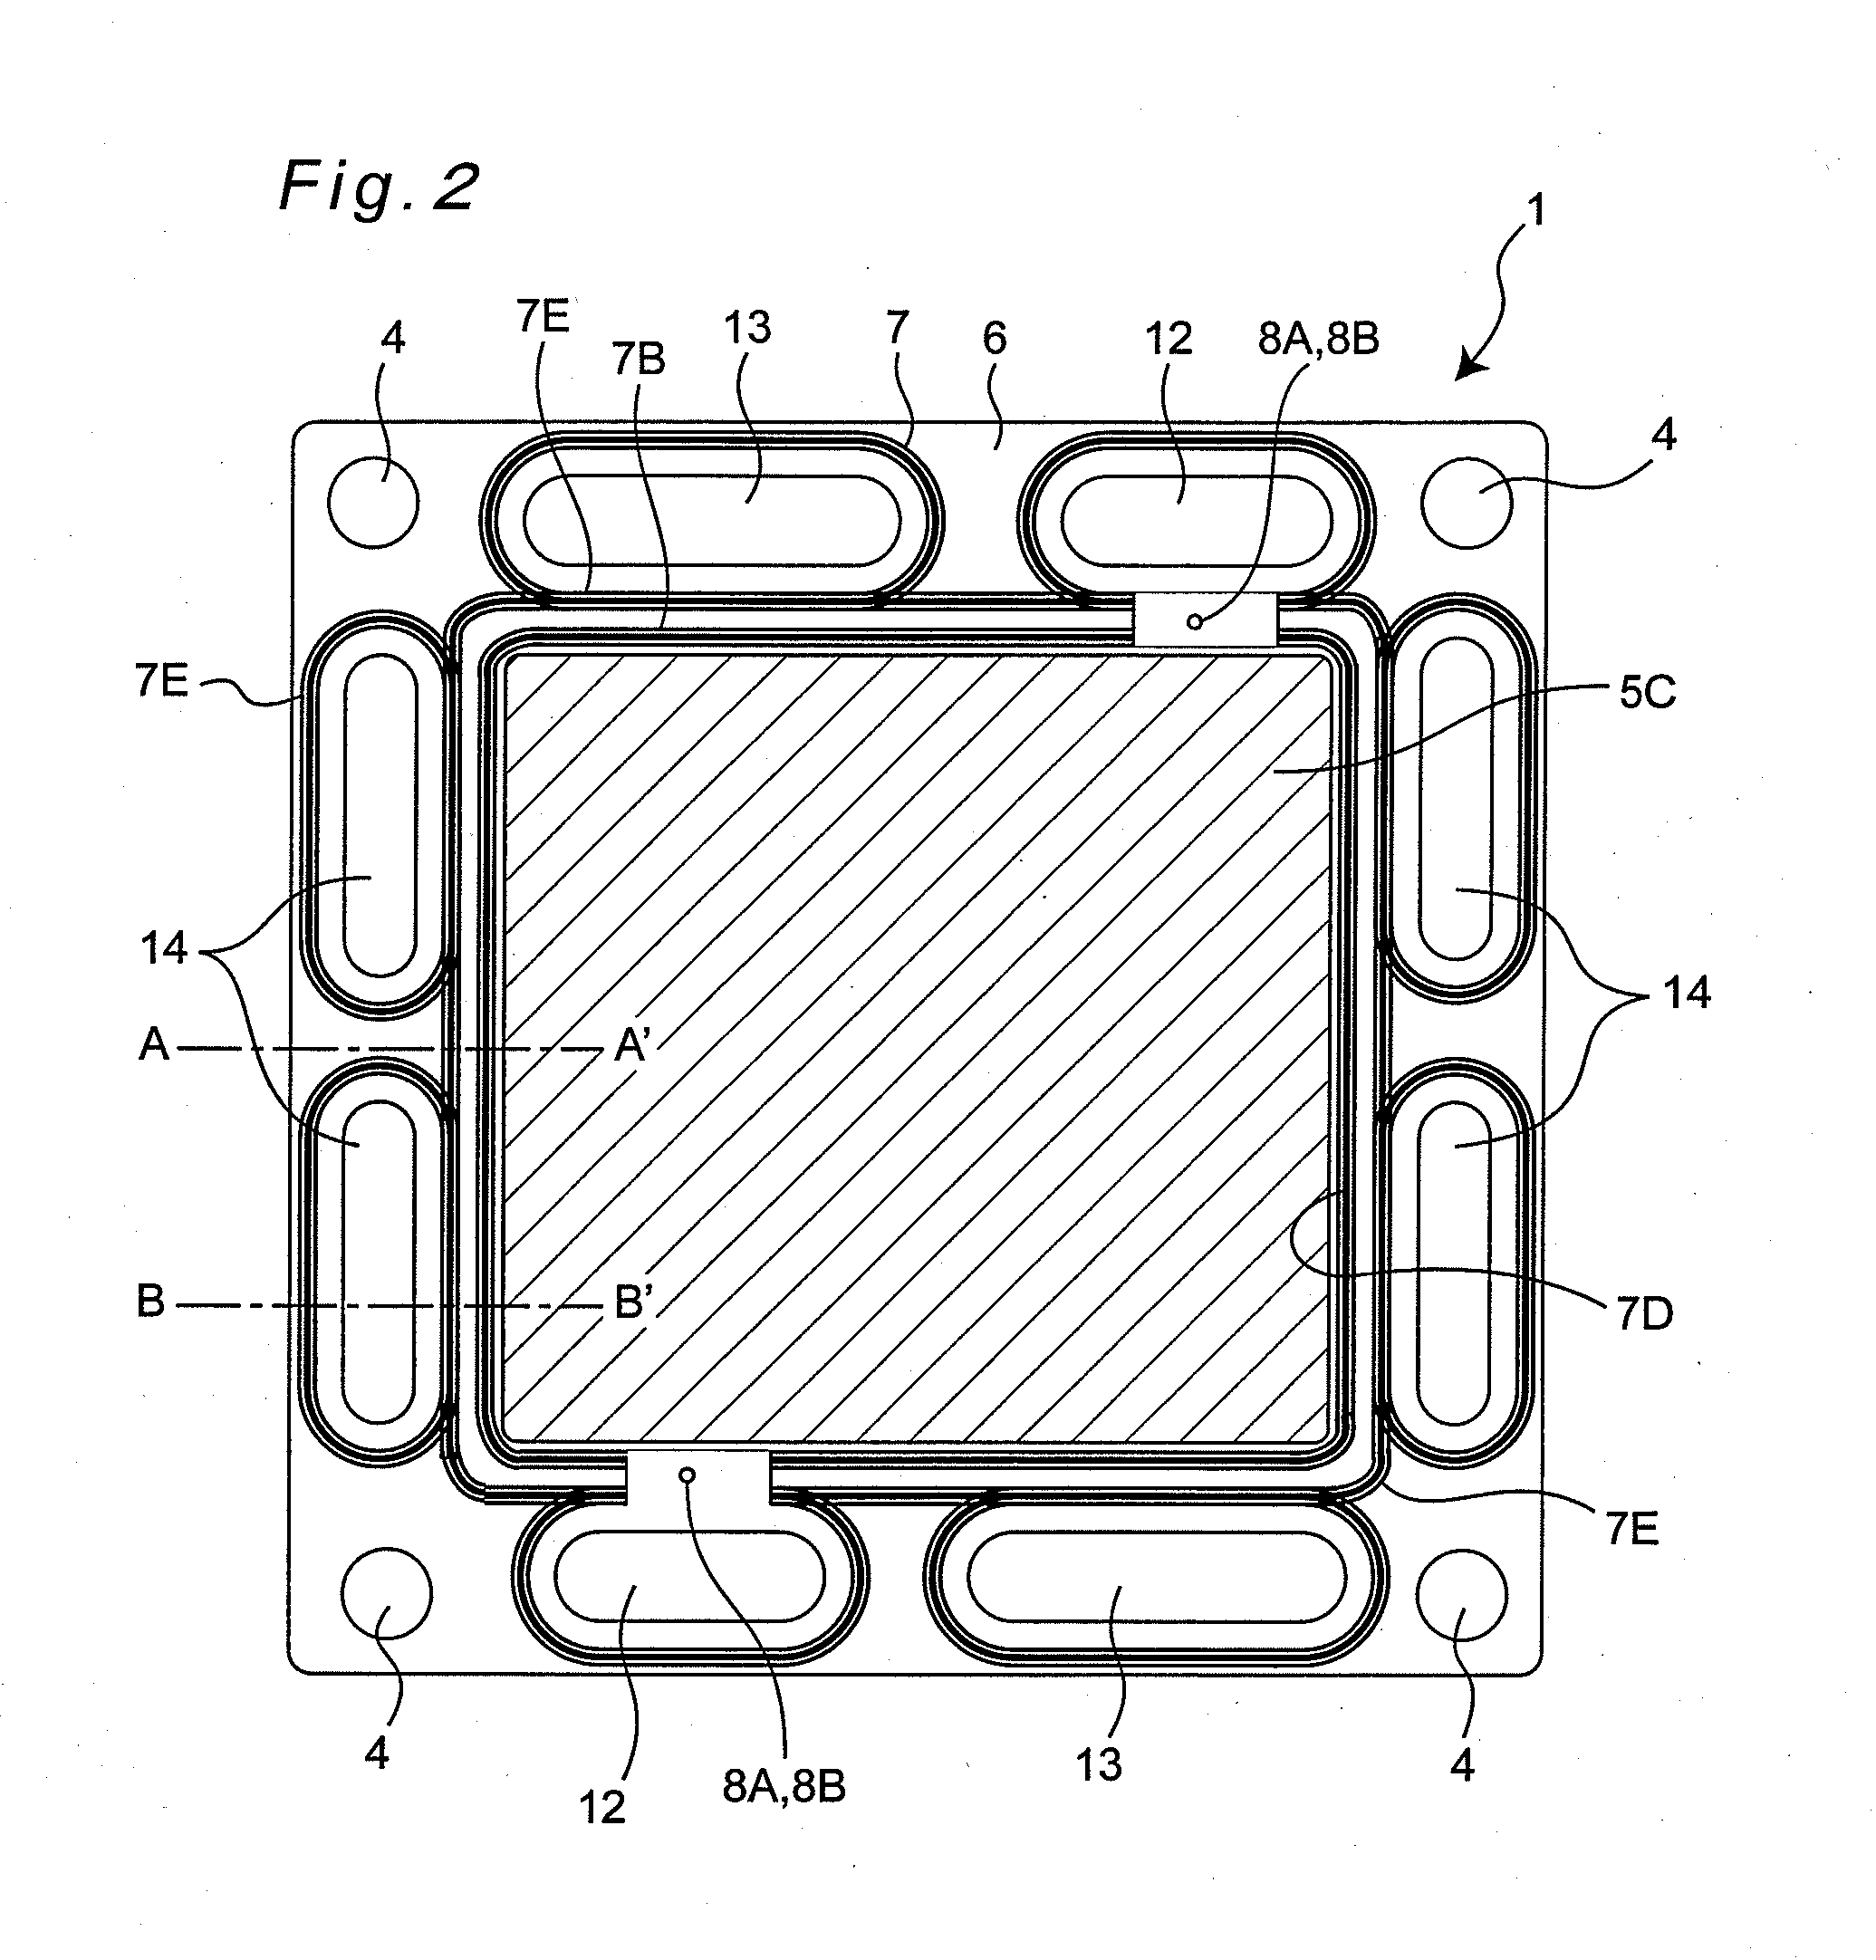 Electrode-membrane-frame assembly for fuel cell, polyelectrolyte fuel cell and manufacturing method therefor